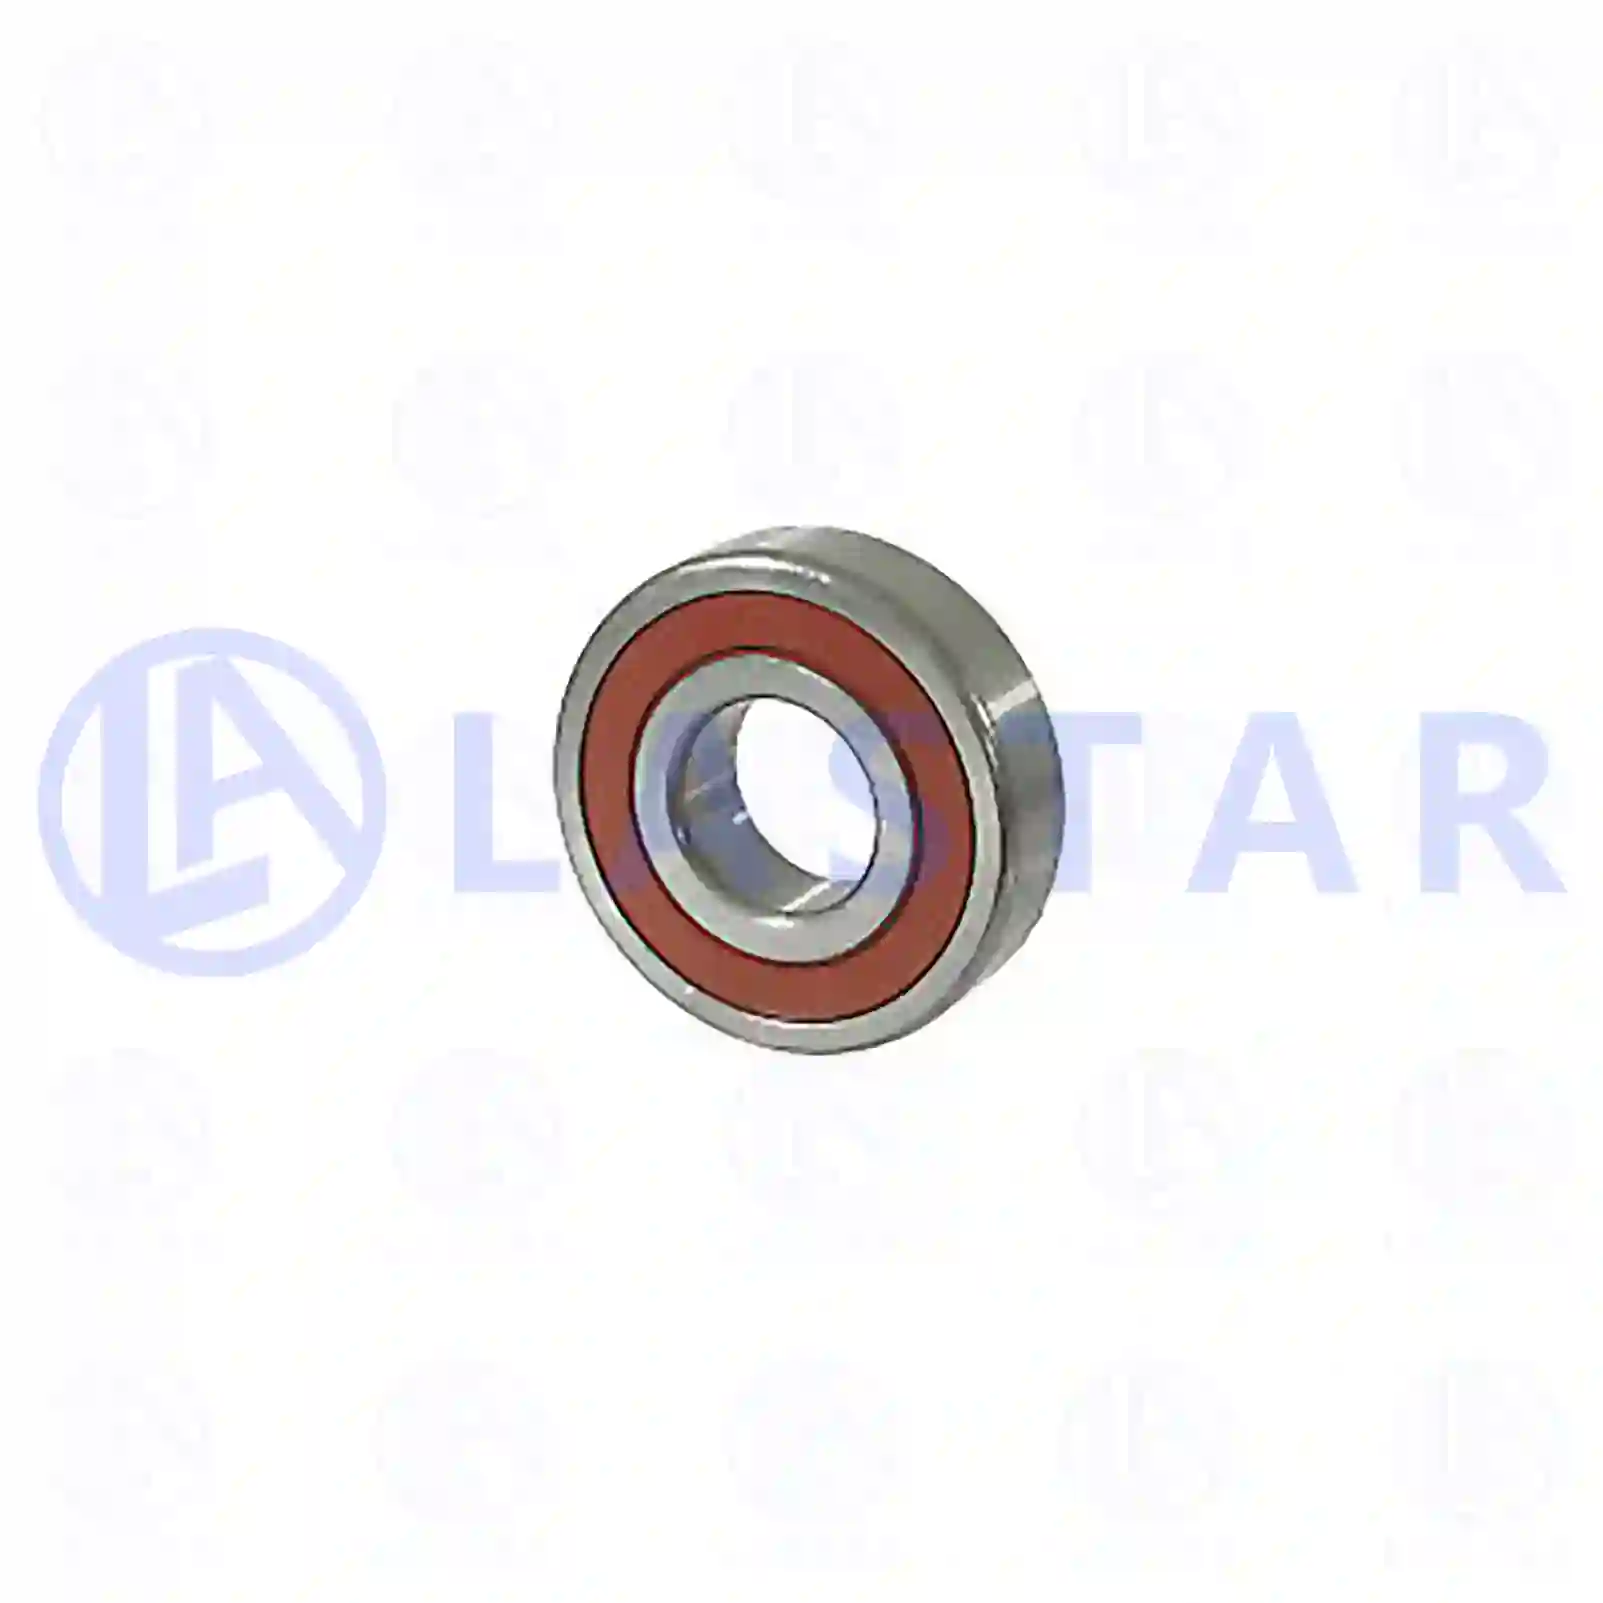 Ball bearing, 77710270, 1276434, 1376955, 68091, 01905280, 01905473, 07075306, 09935795, 09941754, 09960113, 09986035, 24941650, 60735995, 60751645, 60752009, 75207748, 82355484, 01905280, 01905473, 06314505902, 51934100129, 0029819025, 0049813425, 0059811925, 0059812005, 0059812025, 0059813325, 0089811225, 0089814625, 0089815825, 5000805018, 5001831953, 5001831956, 5001836335, 1314205, 1387613, 1422686, 1953794, 305156, 11705744, 12709022, 12709027, 1376955, 244328, 6889262, 694068, 85100098, 049903221A, 049903221C, 049903221F ||  77710270 Lastar Spare Part | Truck Spare Parts, Auotomotive Spare Parts Ball bearing, 77710270, 1276434, 1376955, 68091, 01905280, 01905473, 07075306, 09935795, 09941754, 09960113, 09986035, 24941650, 60735995, 60751645, 60752009, 75207748, 82355484, 01905280, 01905473, 06314505902, 51934100129, 0029819025, 0049813425, 0059811925, 0059812005, 0059812025, 0059813325, 0089811225, 0089814625, 0089815825, 5000805018, 5001831953, 5001831956, 5001836335, 1314205, 1387613, 1422686, 1953794, 305156, 11705744, 12709022, 12709027, 1376955, 244328, 6889262, 694068, 85100098, 049903221A, 049903221C, 049903221F ||  77710270 Lastar Spare Part | Truck Spare Parts, Auotomotive Spare Parts